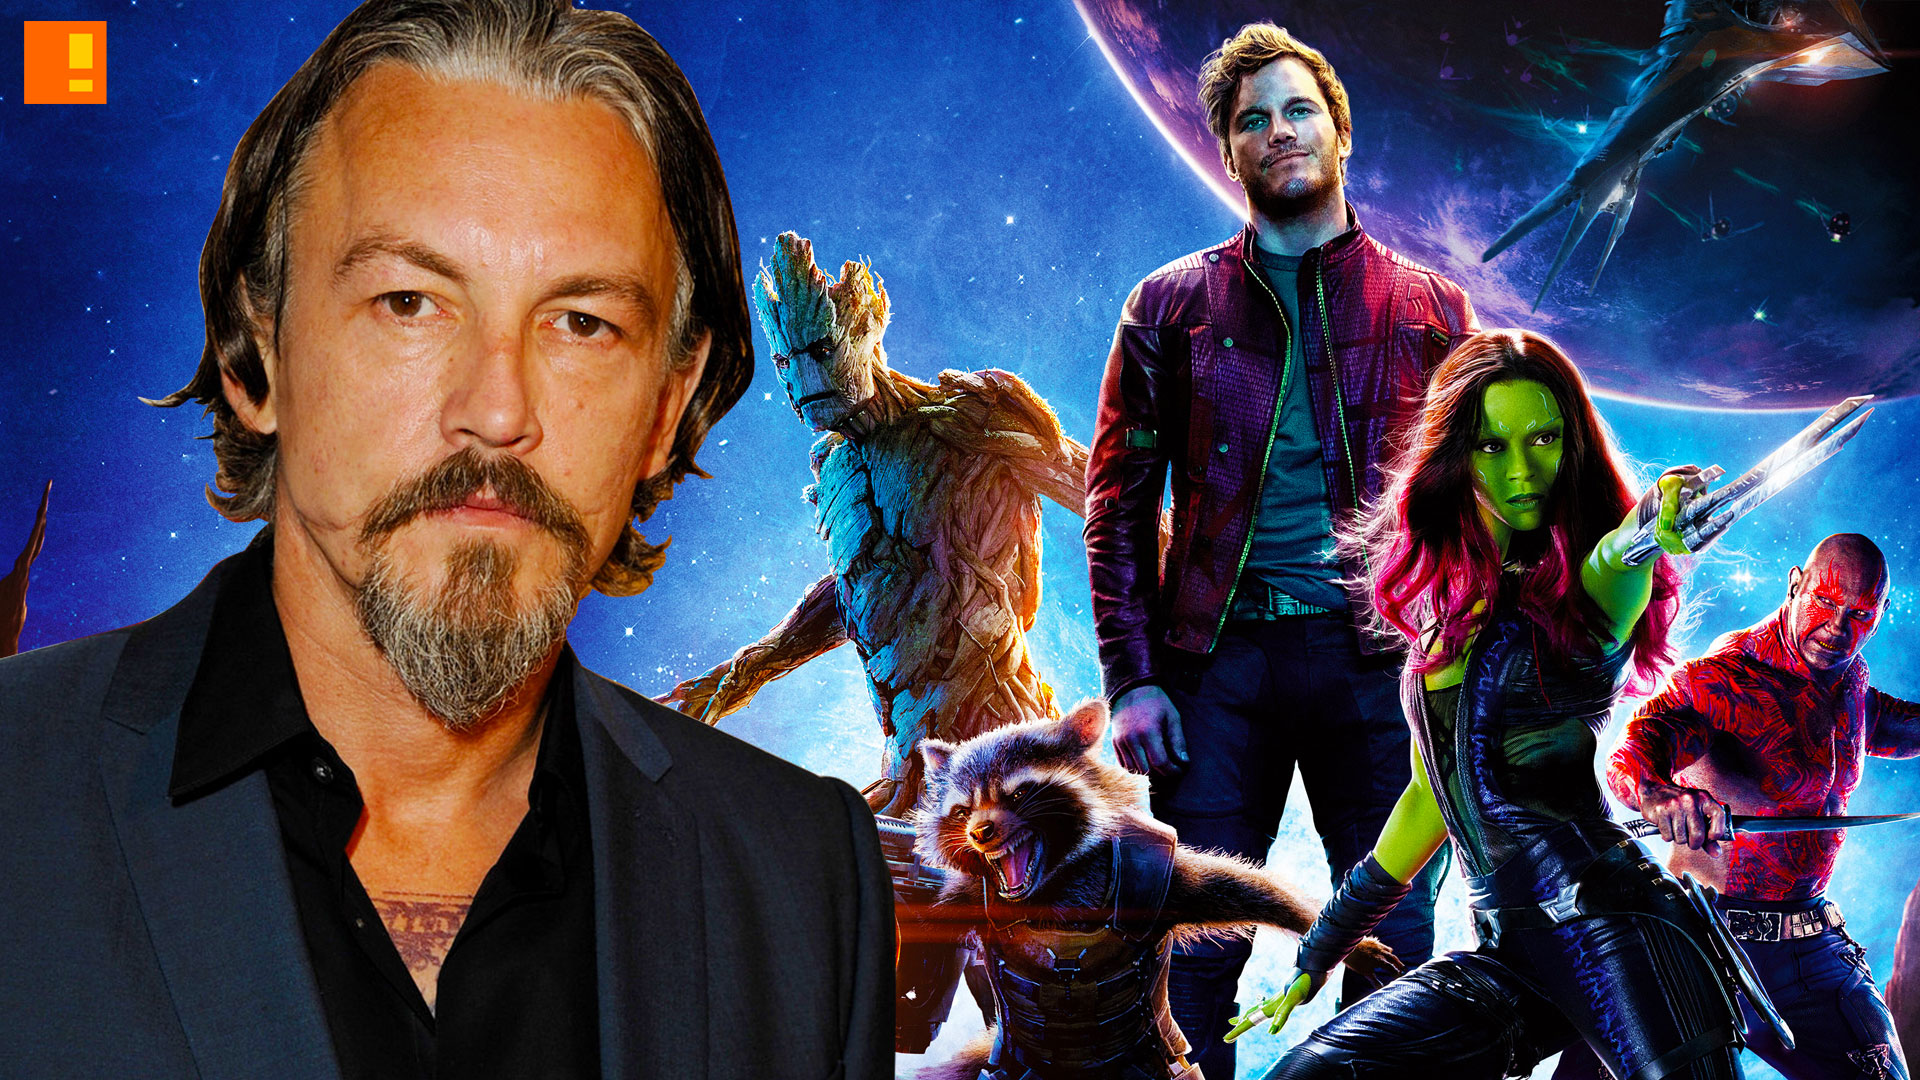 guardians of the galaxy. tommy flanagan. entertainment on tap. @theactionpixel